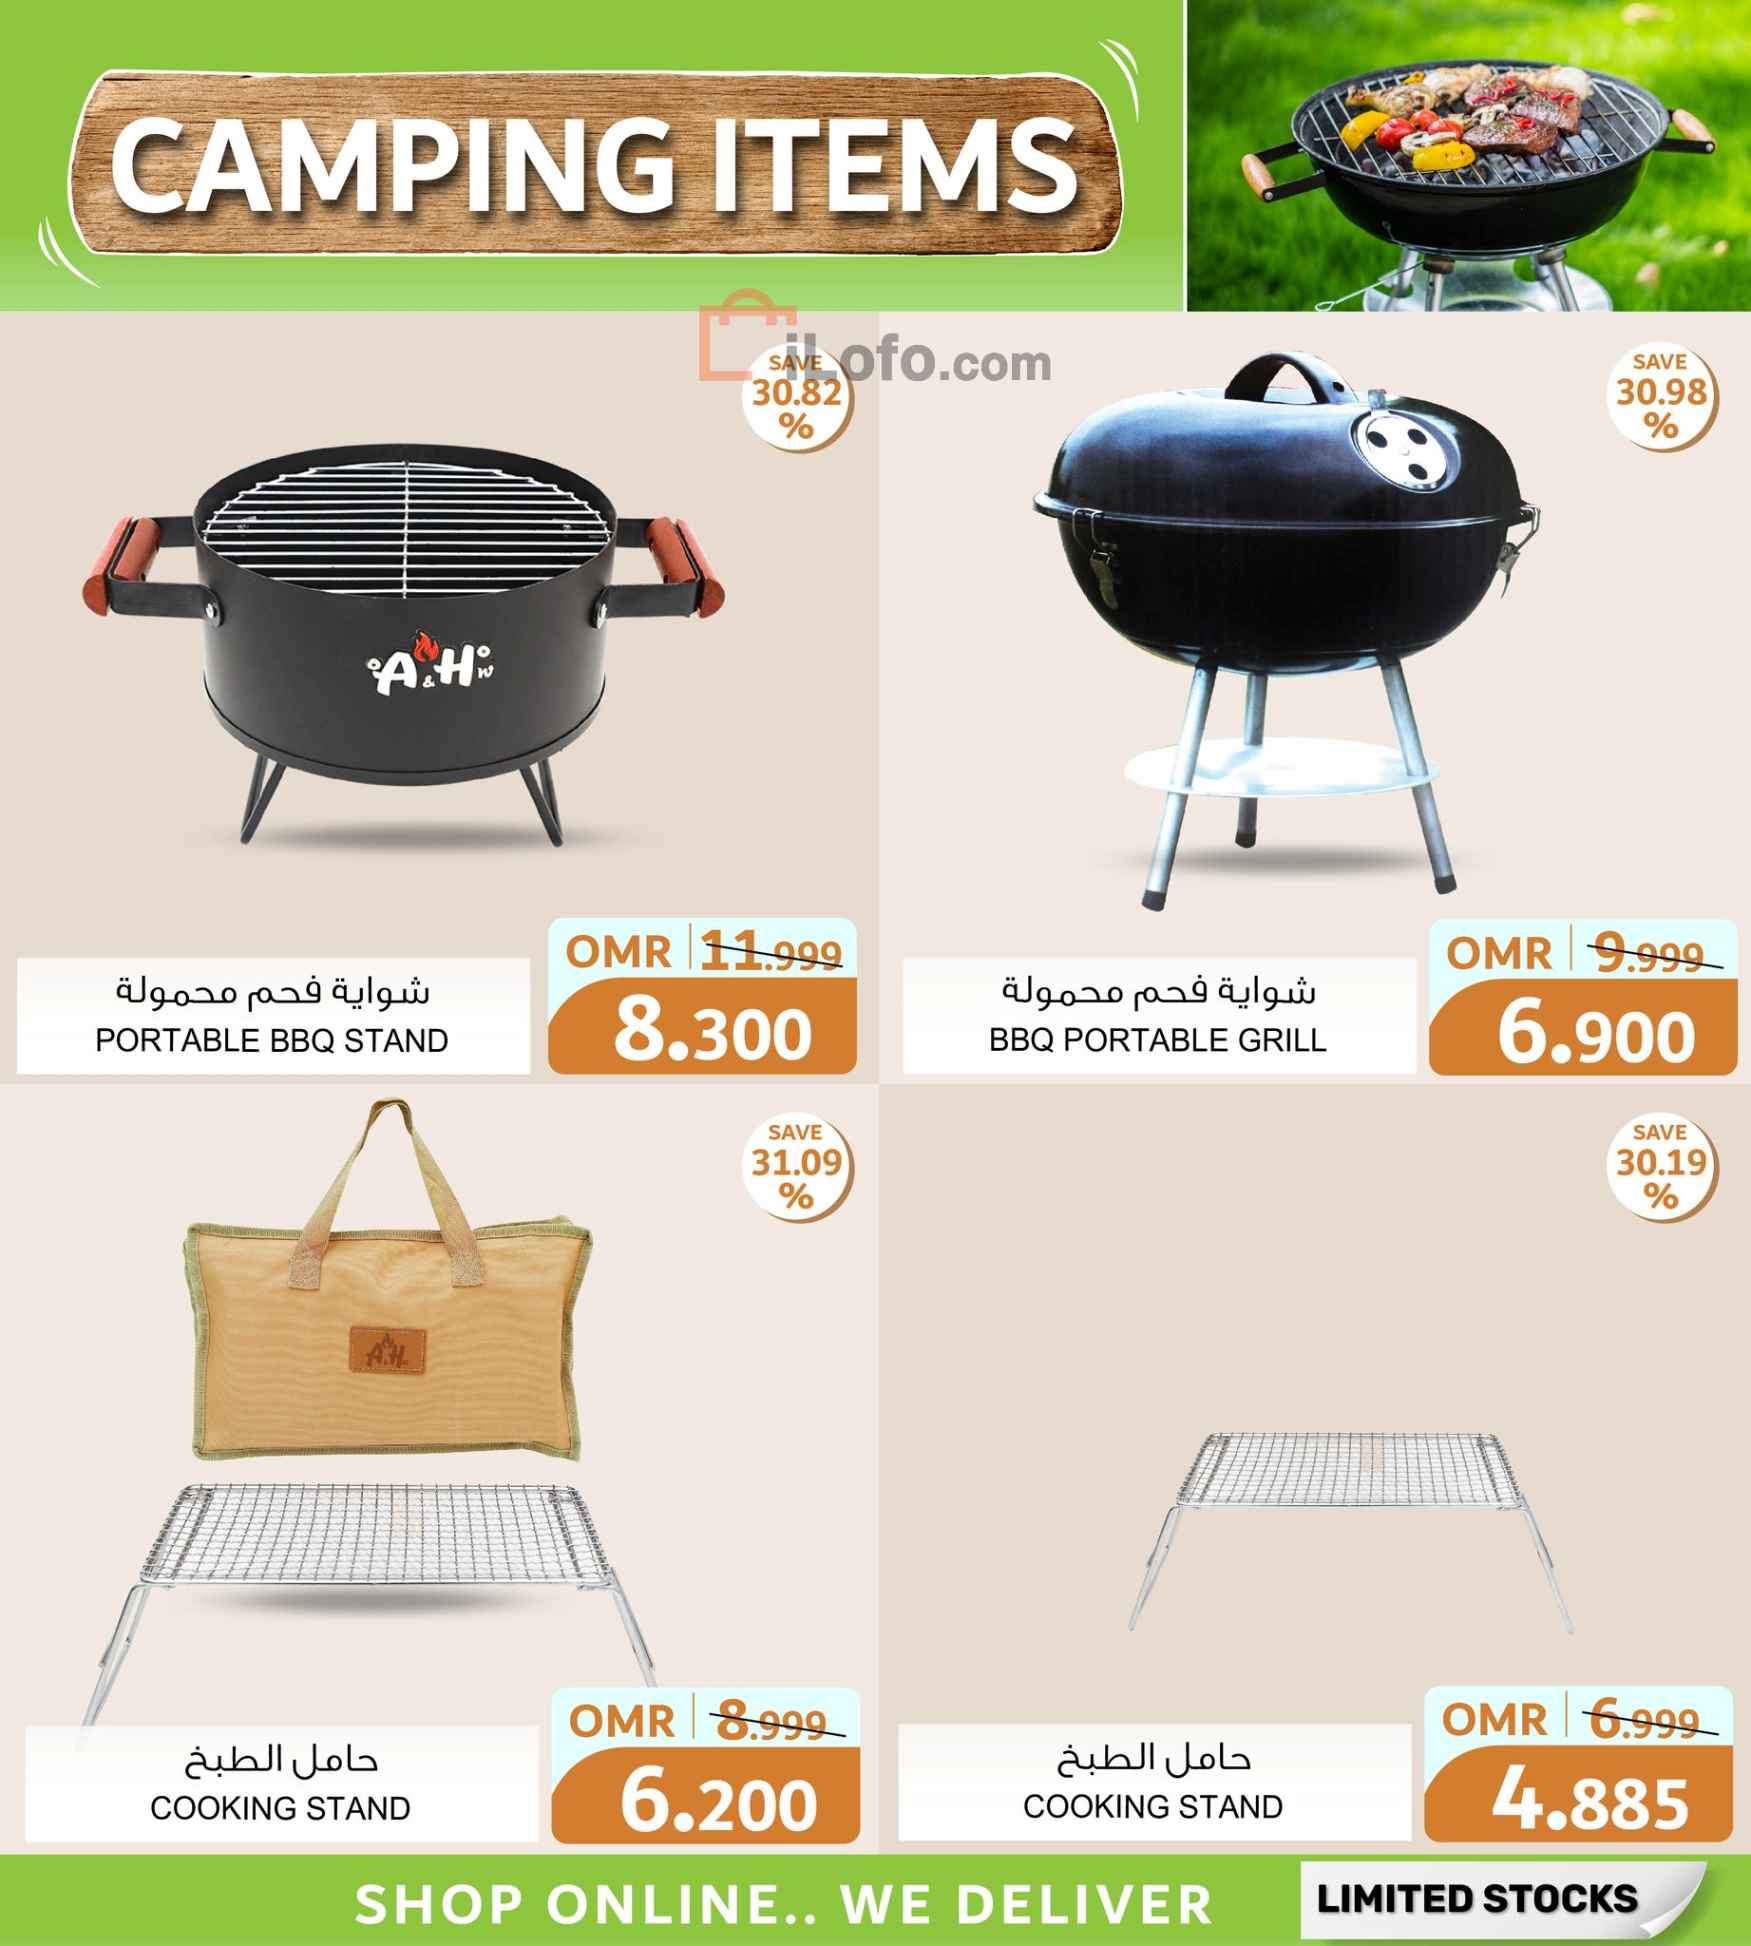 Page 2 at barbecue - outdoor and camping offers at A&H Oman